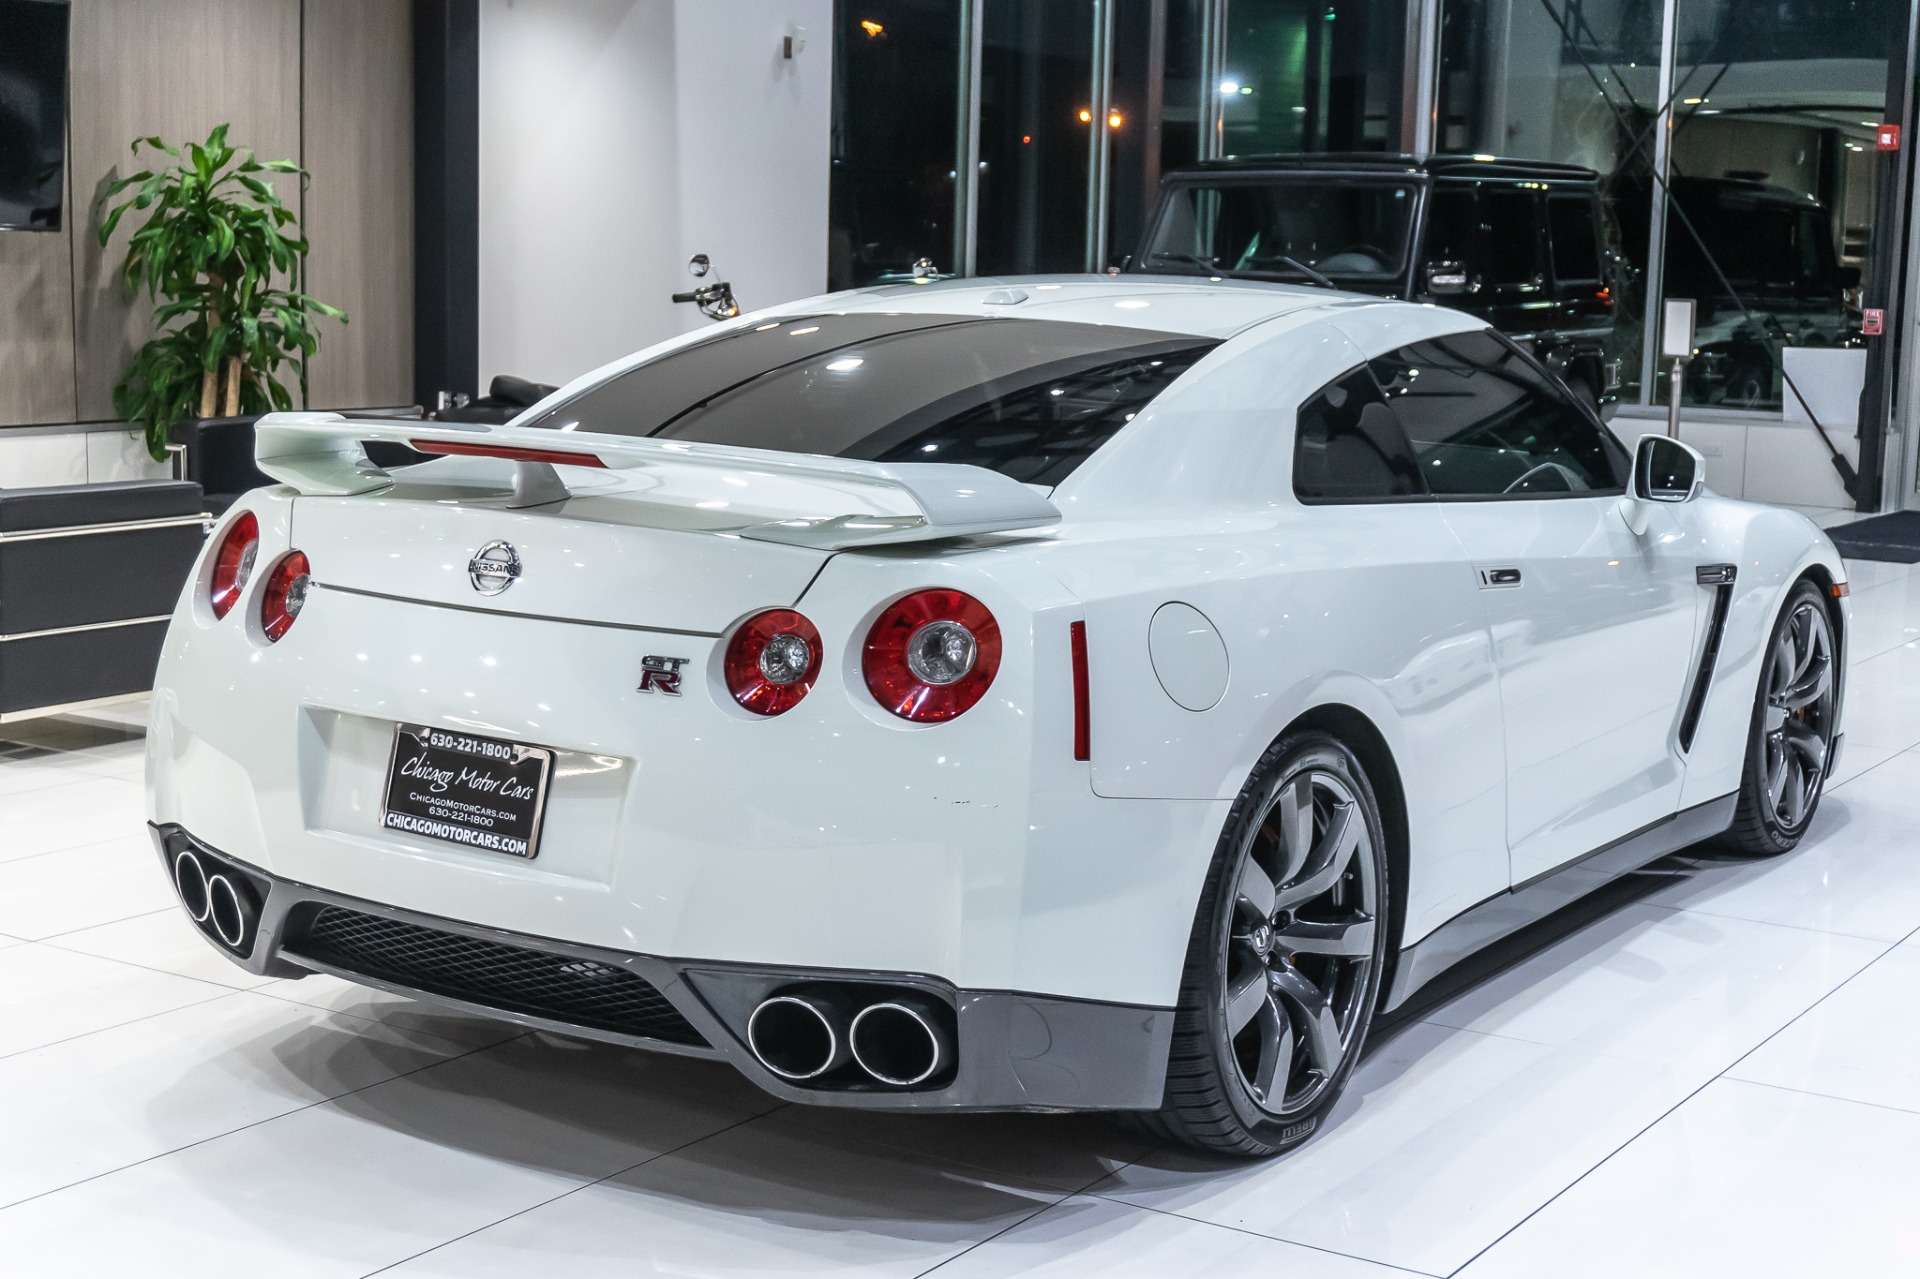 Used 2009 Nissan Gt R Premium Coupe Completely Stock Ready For Upgrades For Sale Special 4145